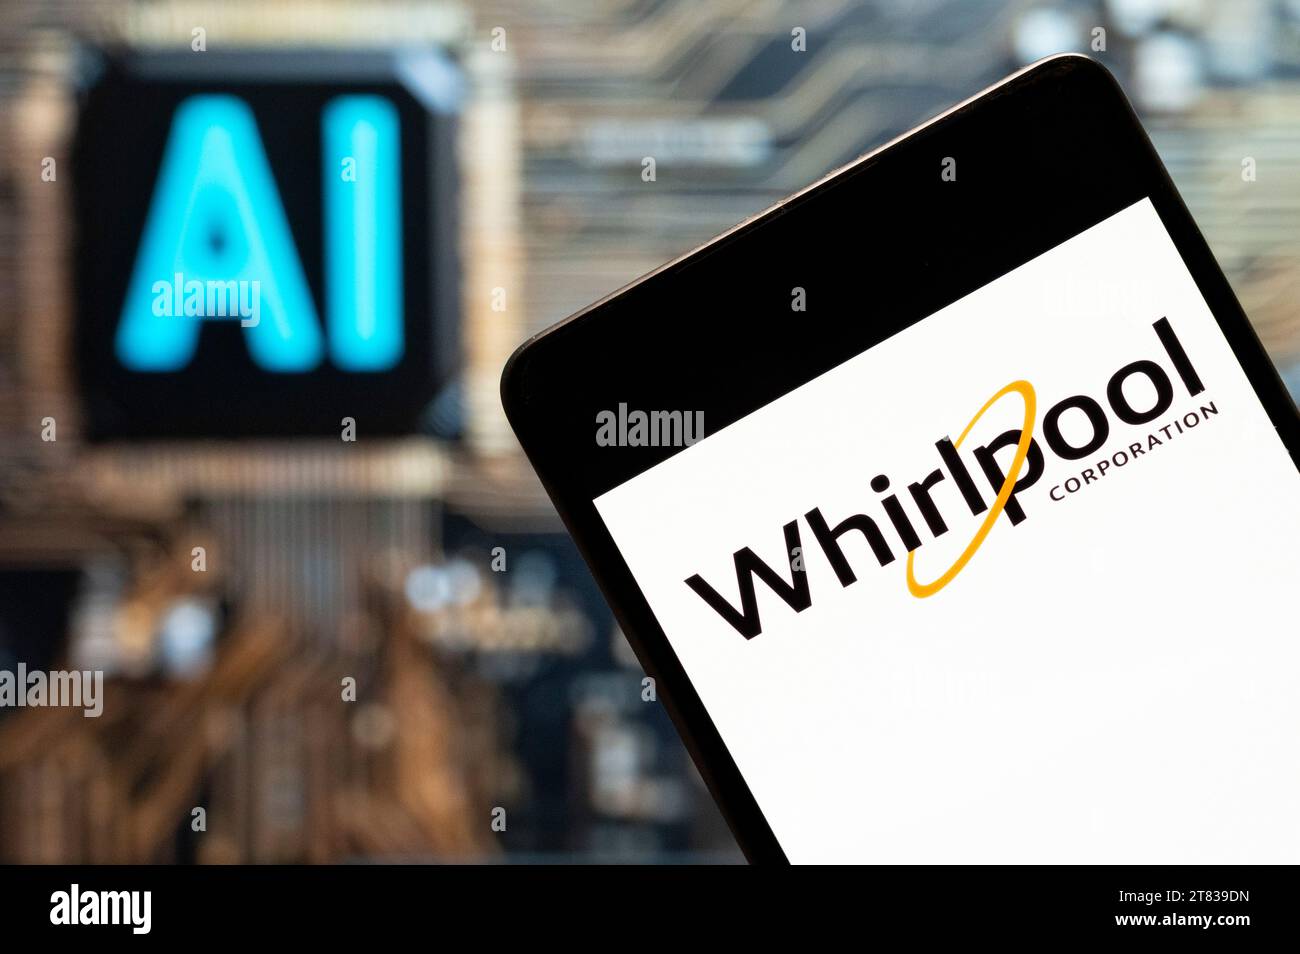 In this photo illustration, the American multinational manufacturer and marketer of home appliances, Whirlpool Corporation (NYSE: WHR), logo seen displayed on a smartphone with an Artificial intelligence (AI) chip and symbol in the background. Stock Photo